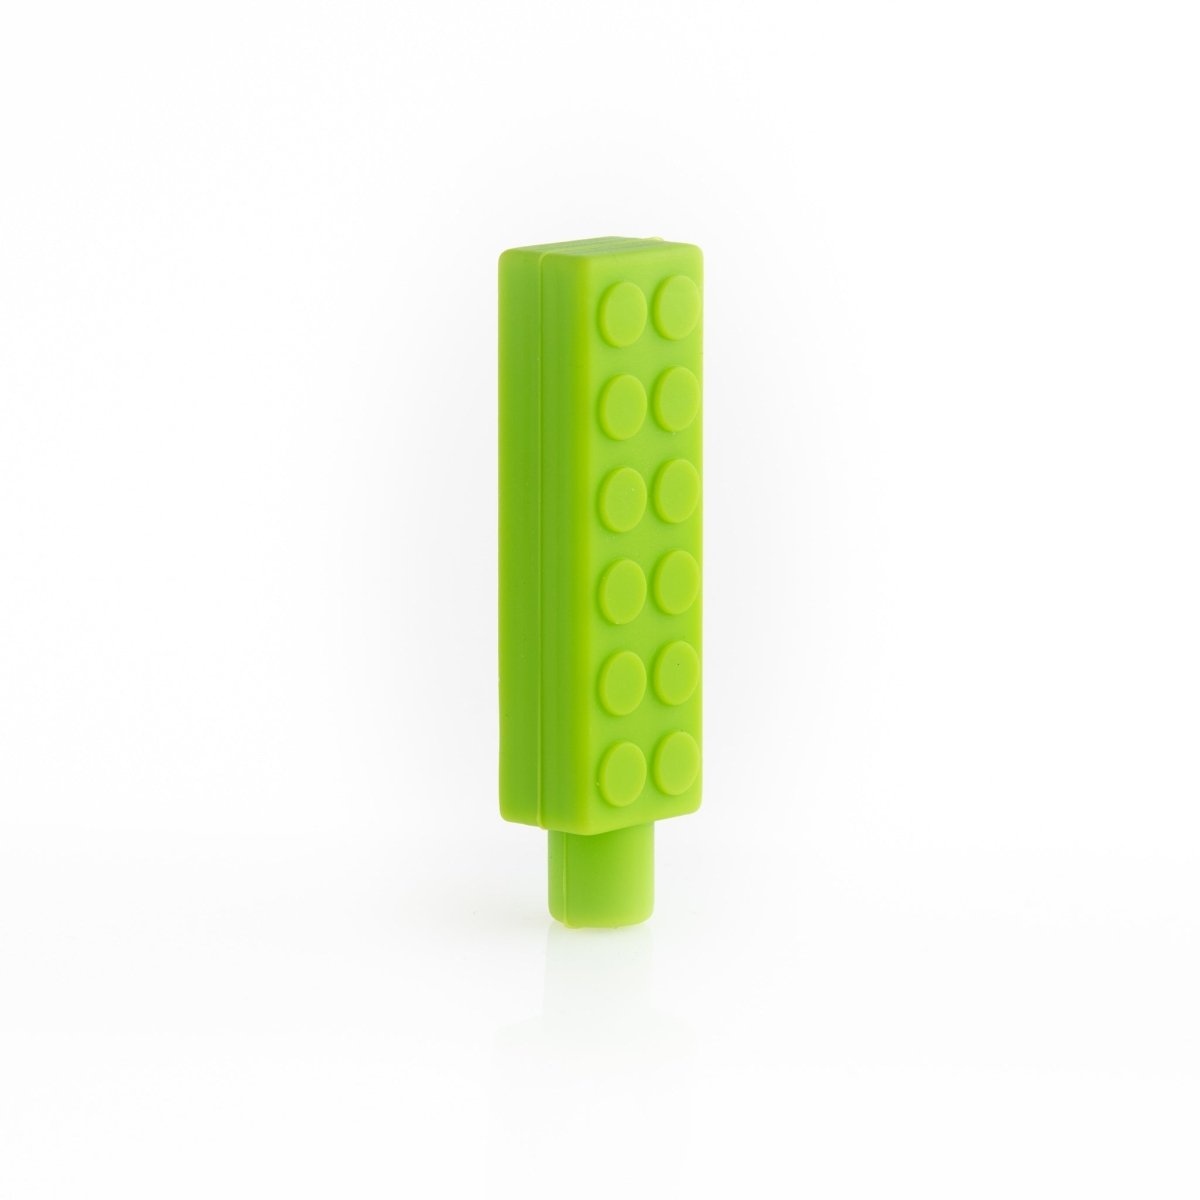 Silicone Teethers and Pendants Chewable Pencil Topper Chartreuse Green from Cara & Co Craft Supply